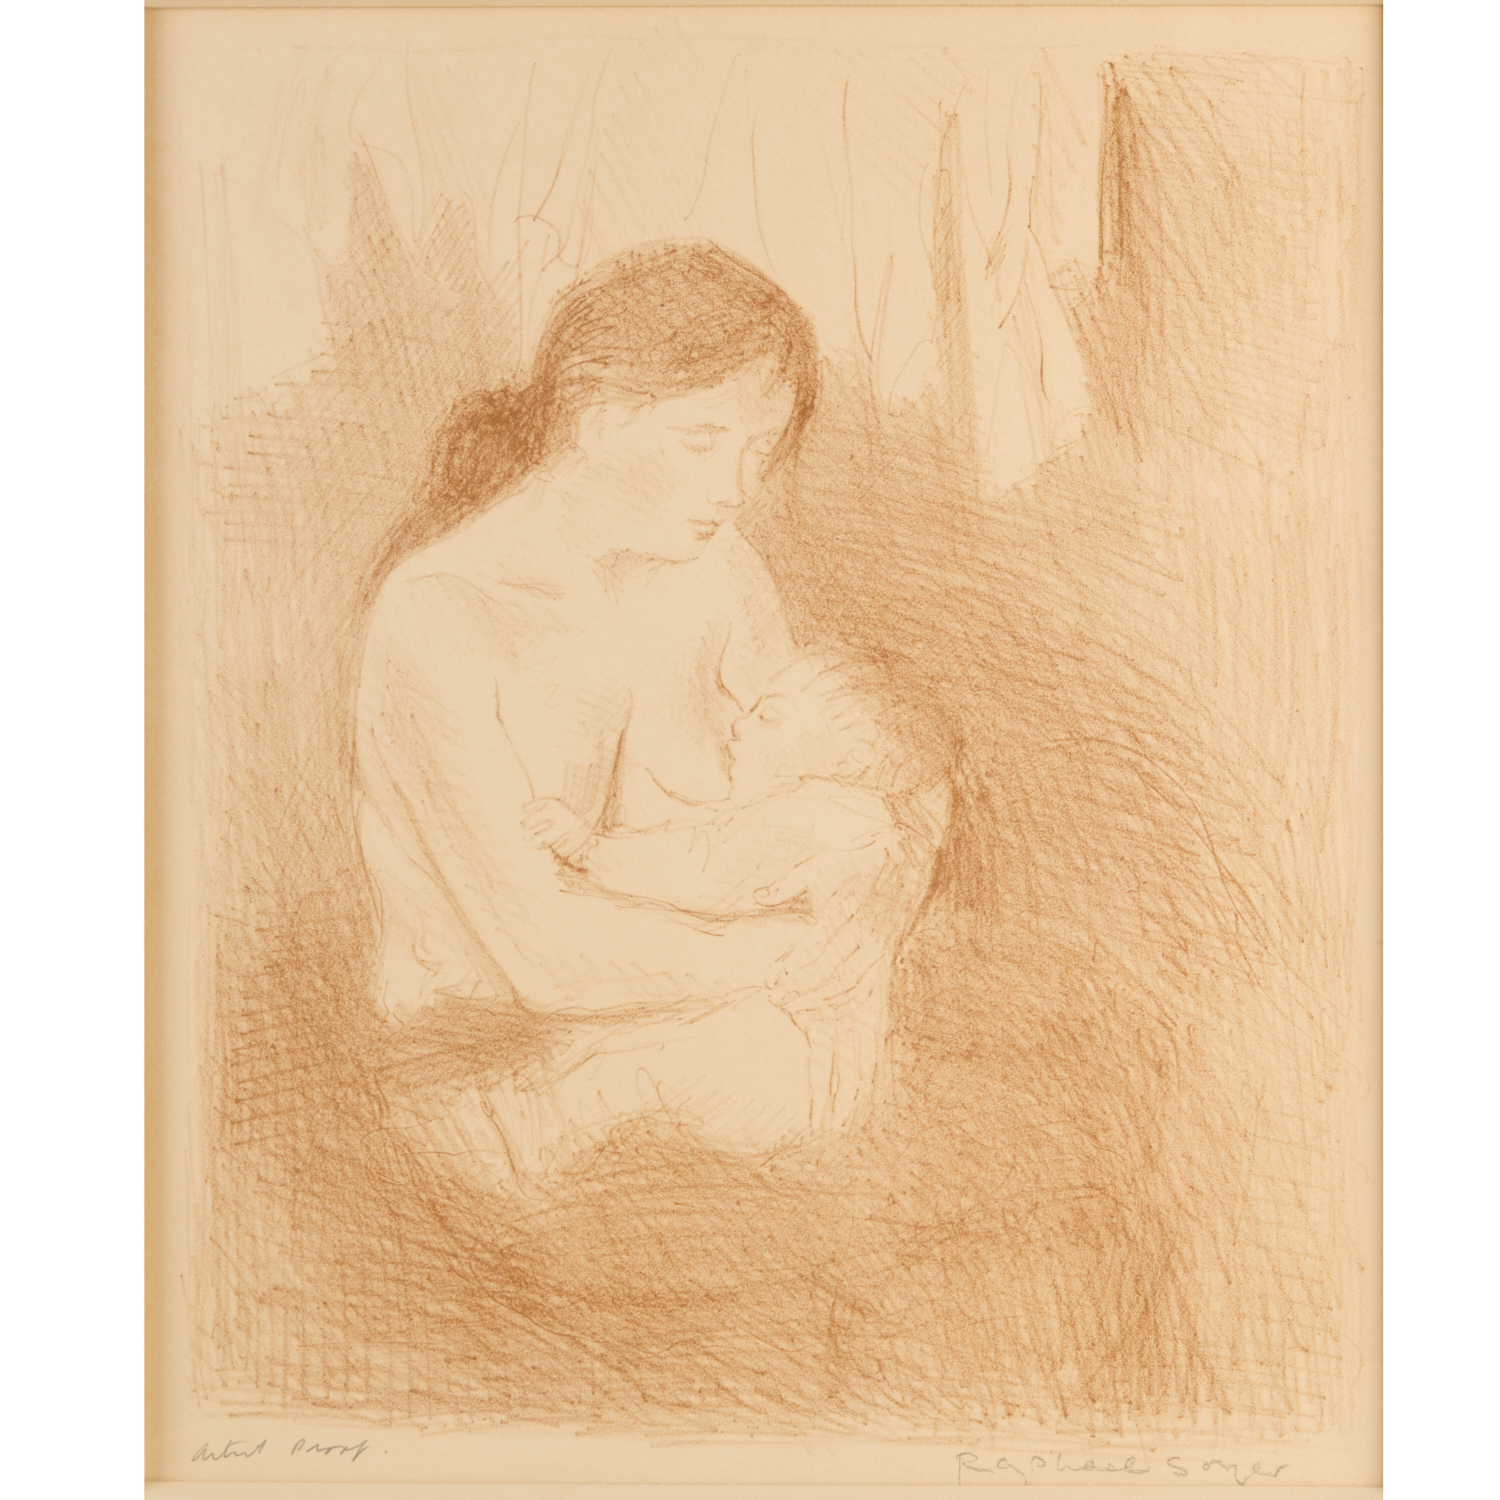 RAPHAEL SOYER, LITHOGRAPH, SIGNED